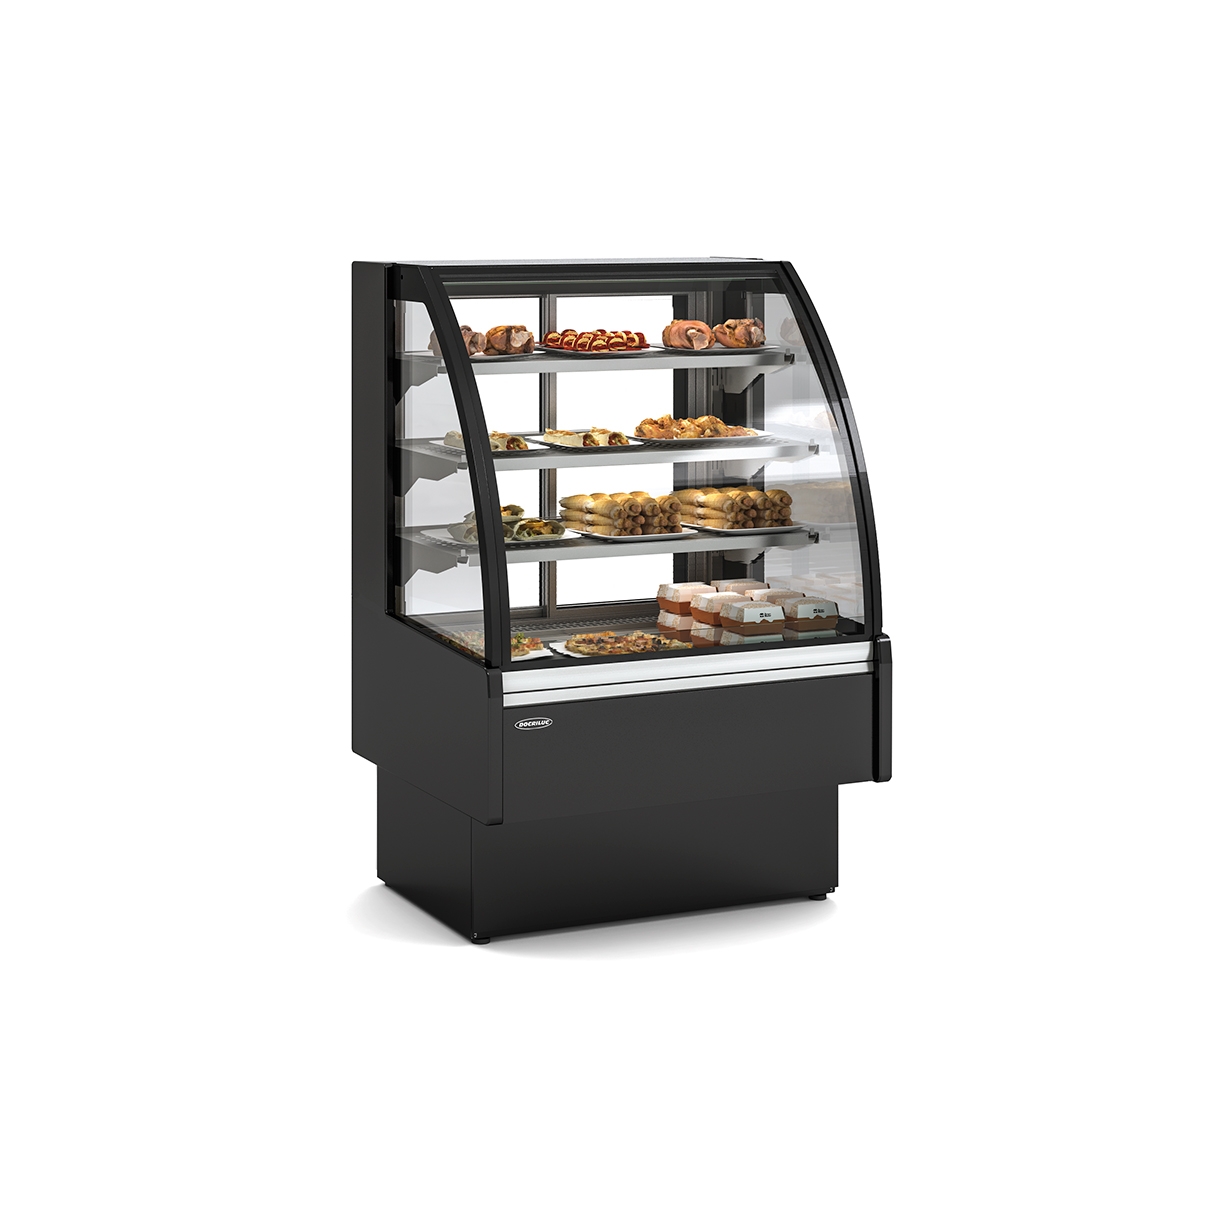 HOT VENTILATED DISPLAY CABINET VV-HE-C